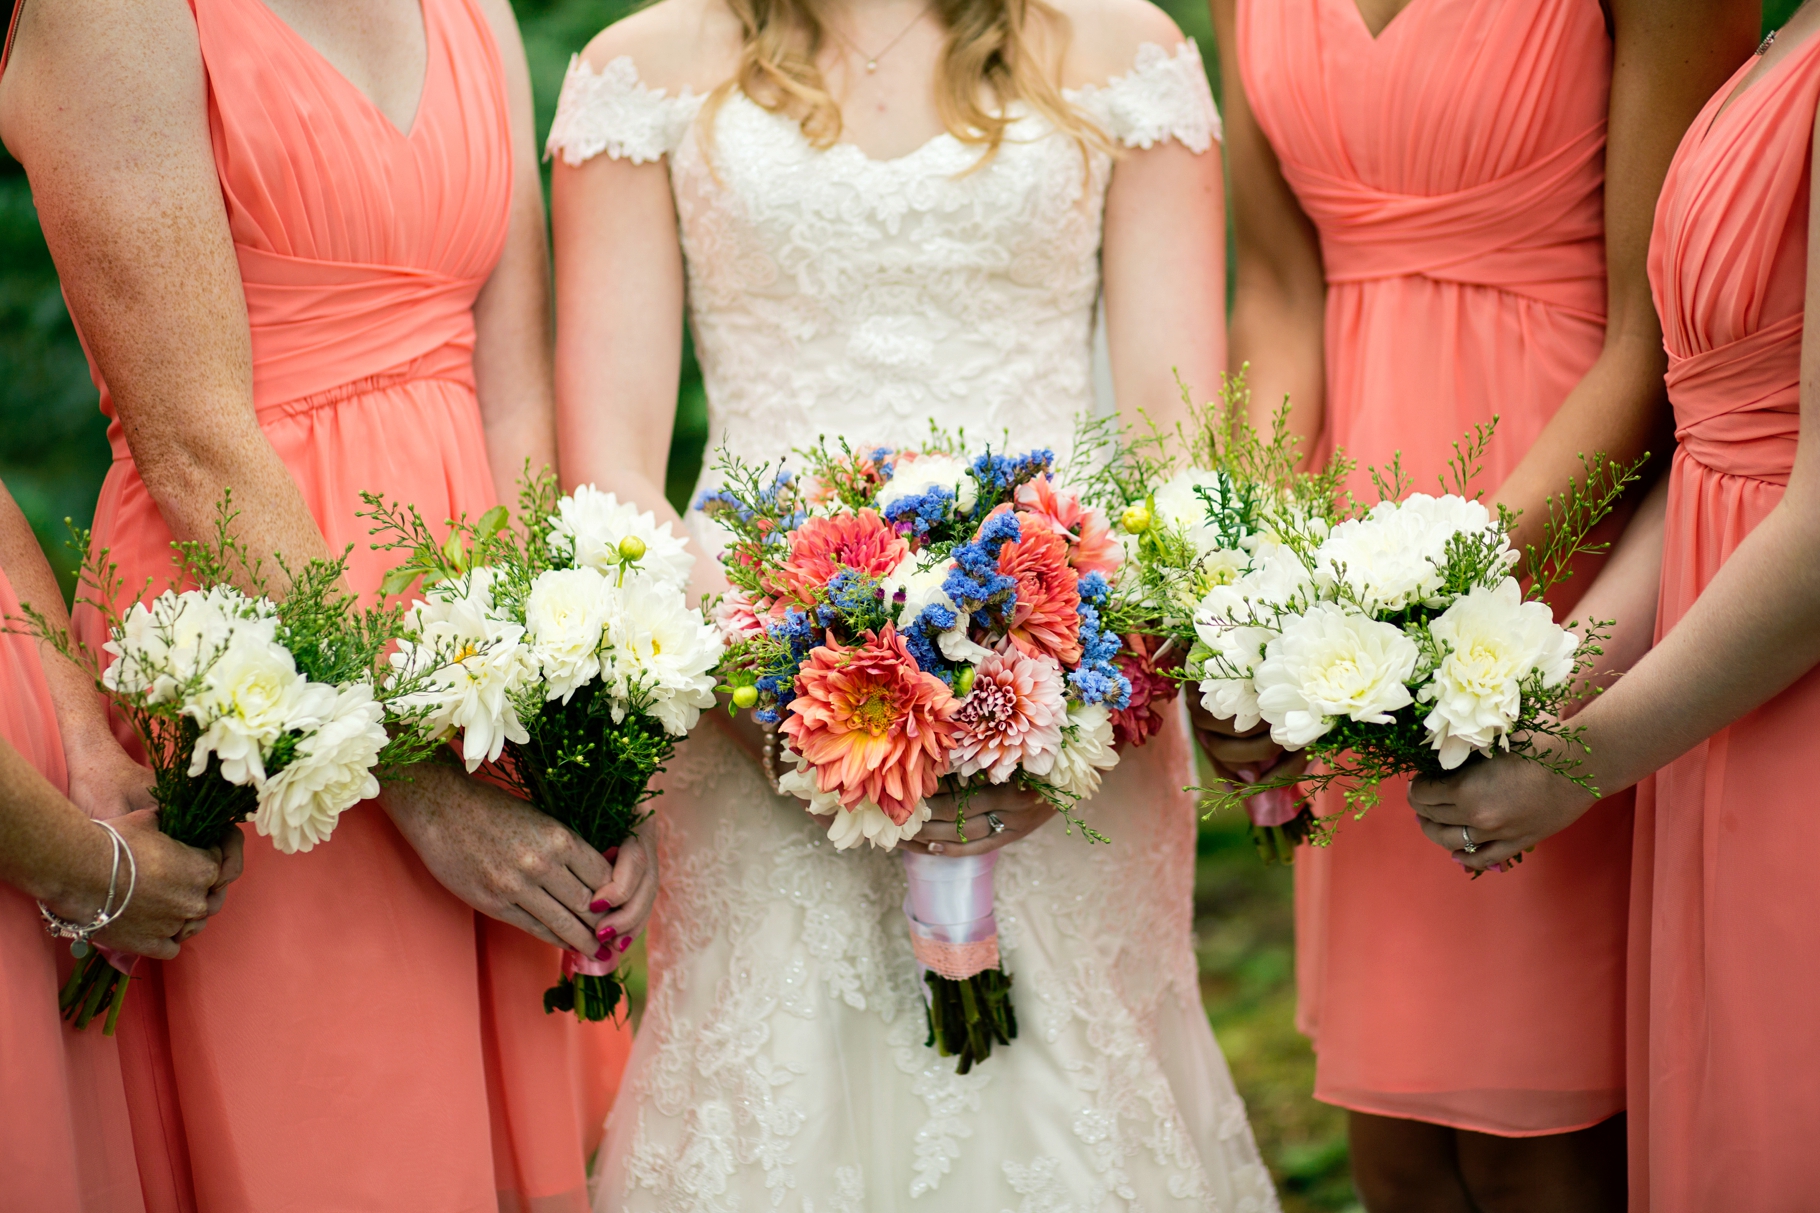 10-Bridesmaid-Portraits-Bridal-Bouquet-Flowers-Dahlias-Bride-wooded-bluff-olympic-mountains-log-cabin-Kitsap-Memorial-State-Park-Forest-Northwest-Photographer-Seattle-Wedding-Photography-by-Betty-Elaine